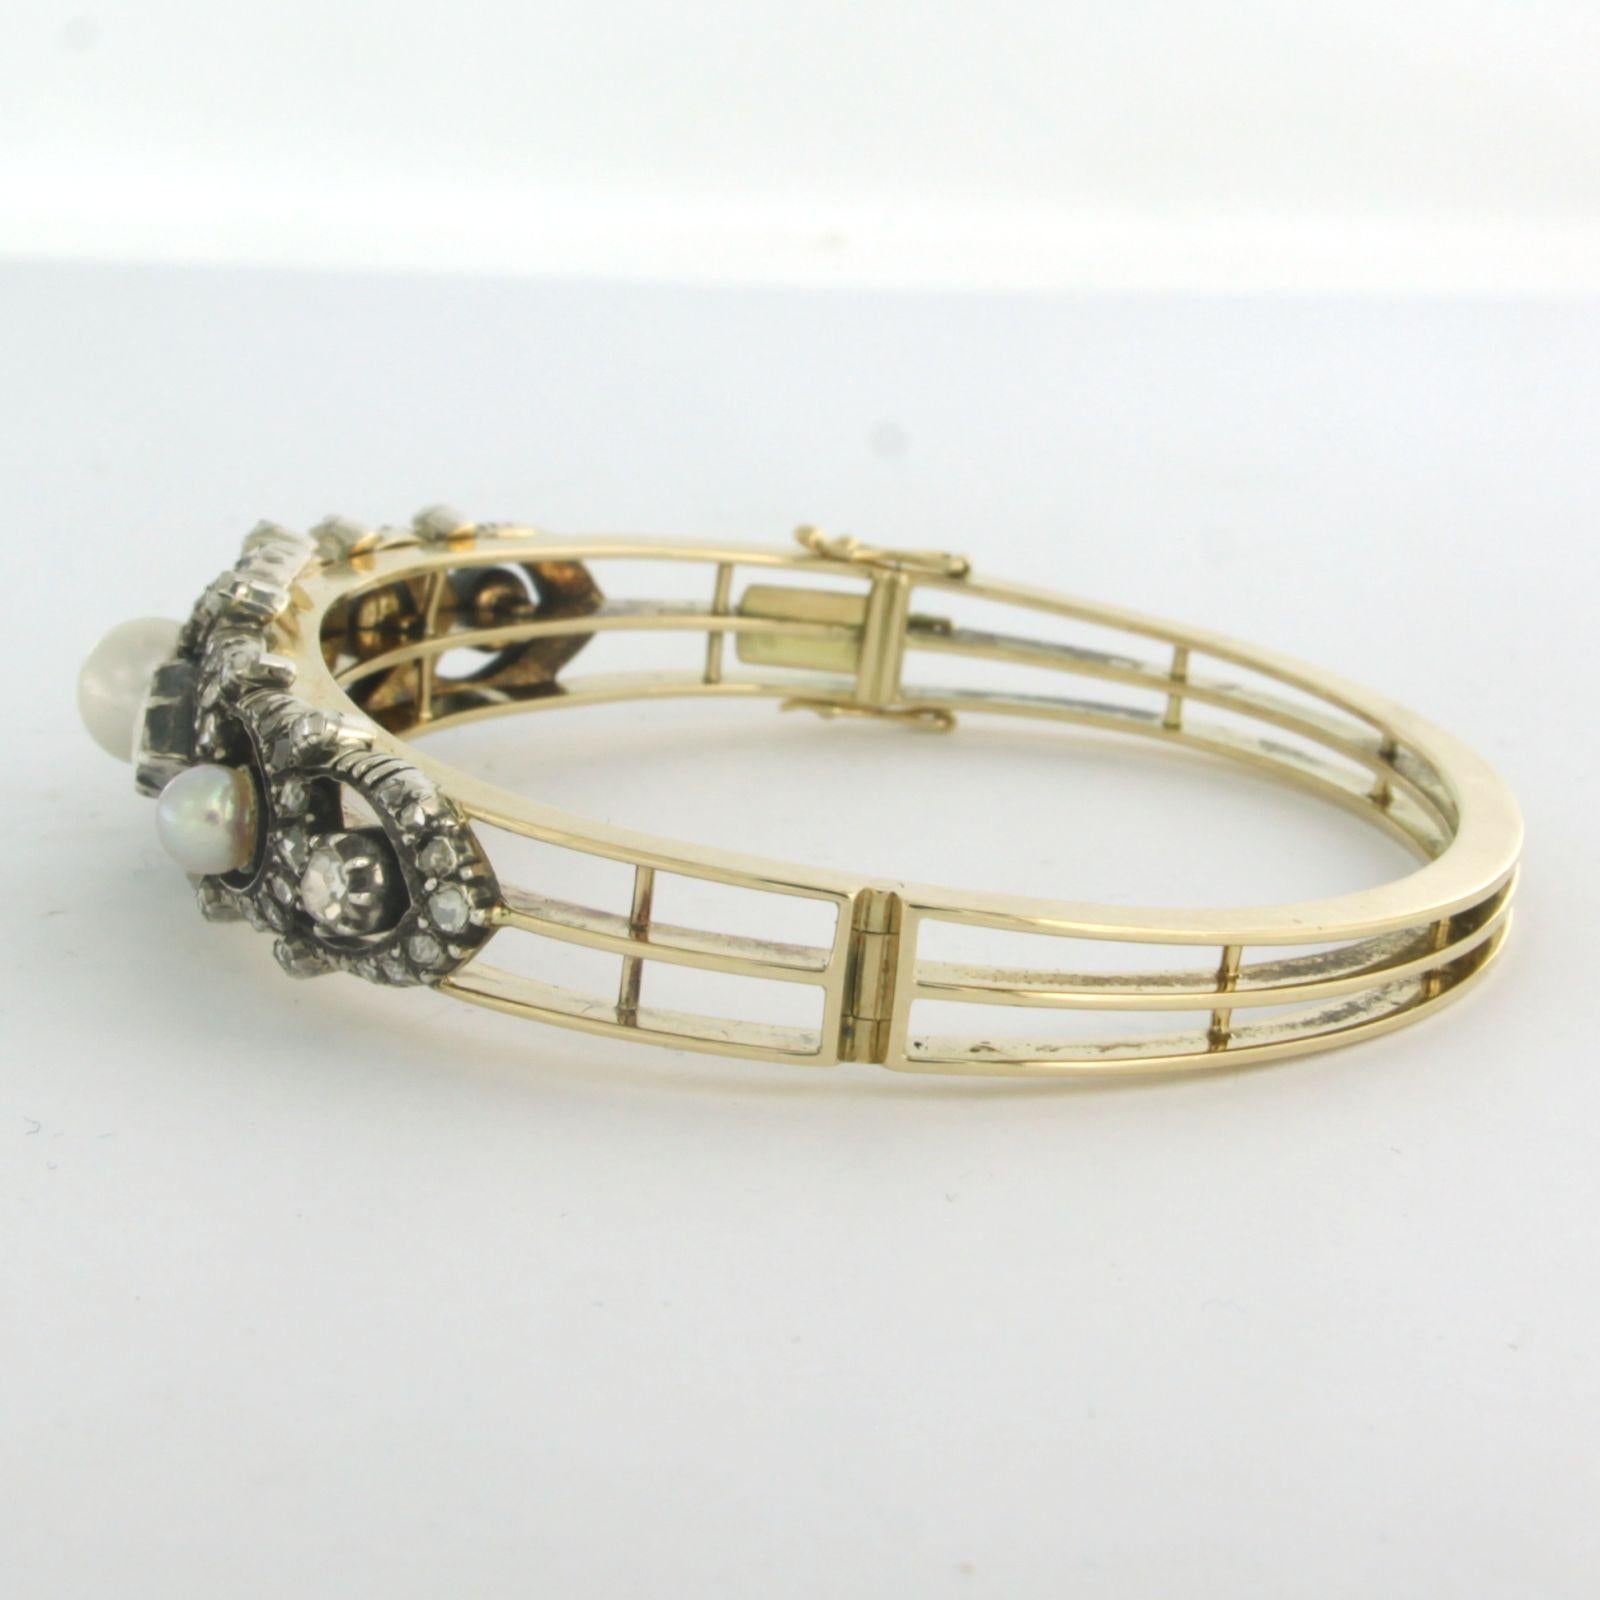 Clamper Bracelet set with pearls and diamonds 14k yellow gold and silver In Good Condition For Sale In The Hague, ZH